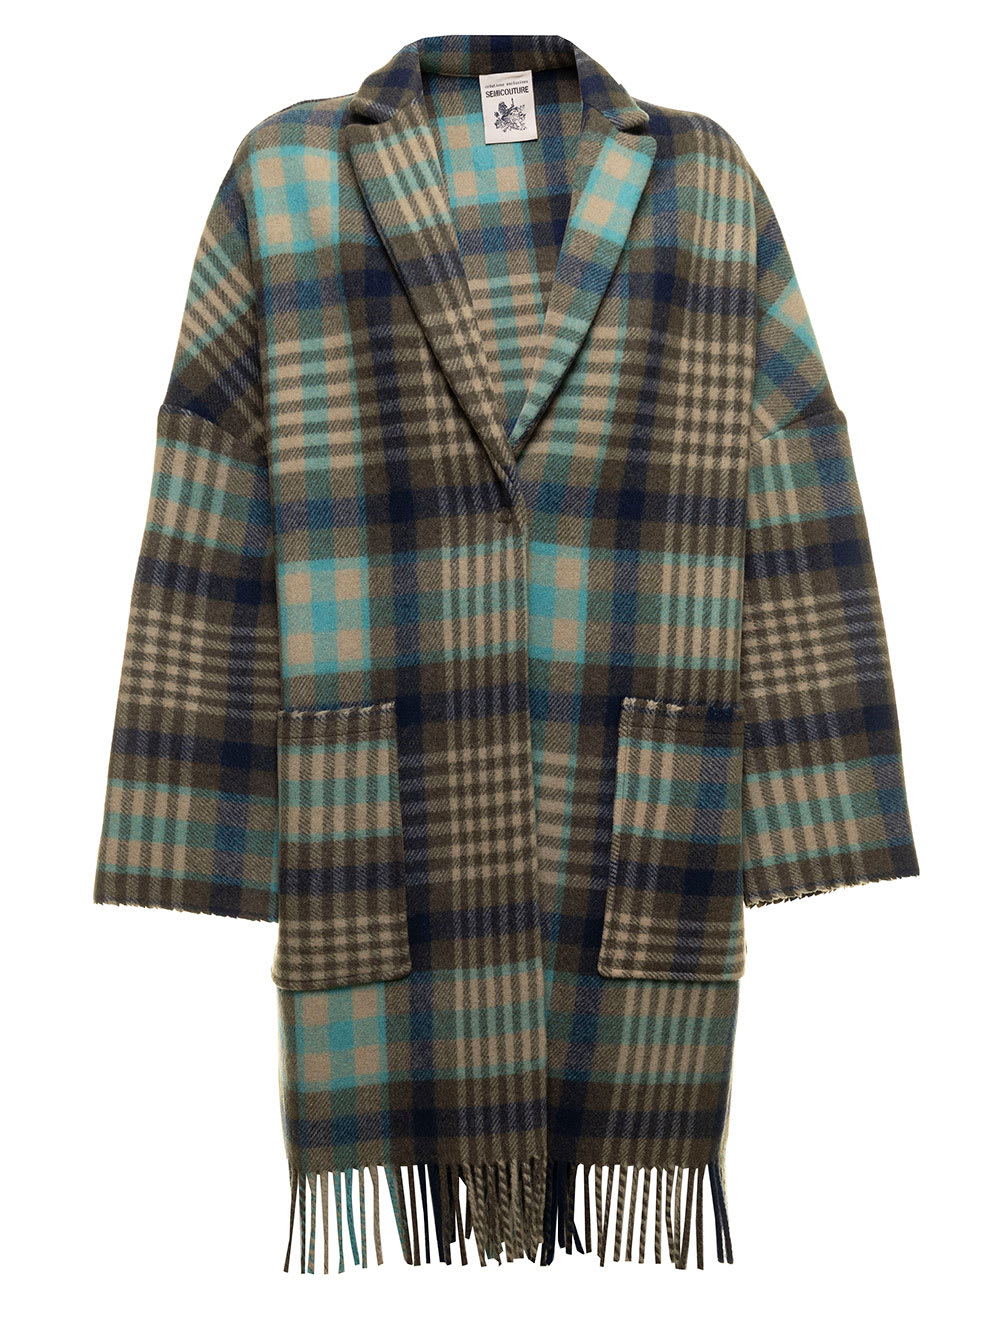 SEMICOUTURE SEMICOUTURE WOMANS MULTICOLOR WOOL CHECK COAT WITH FRINGES